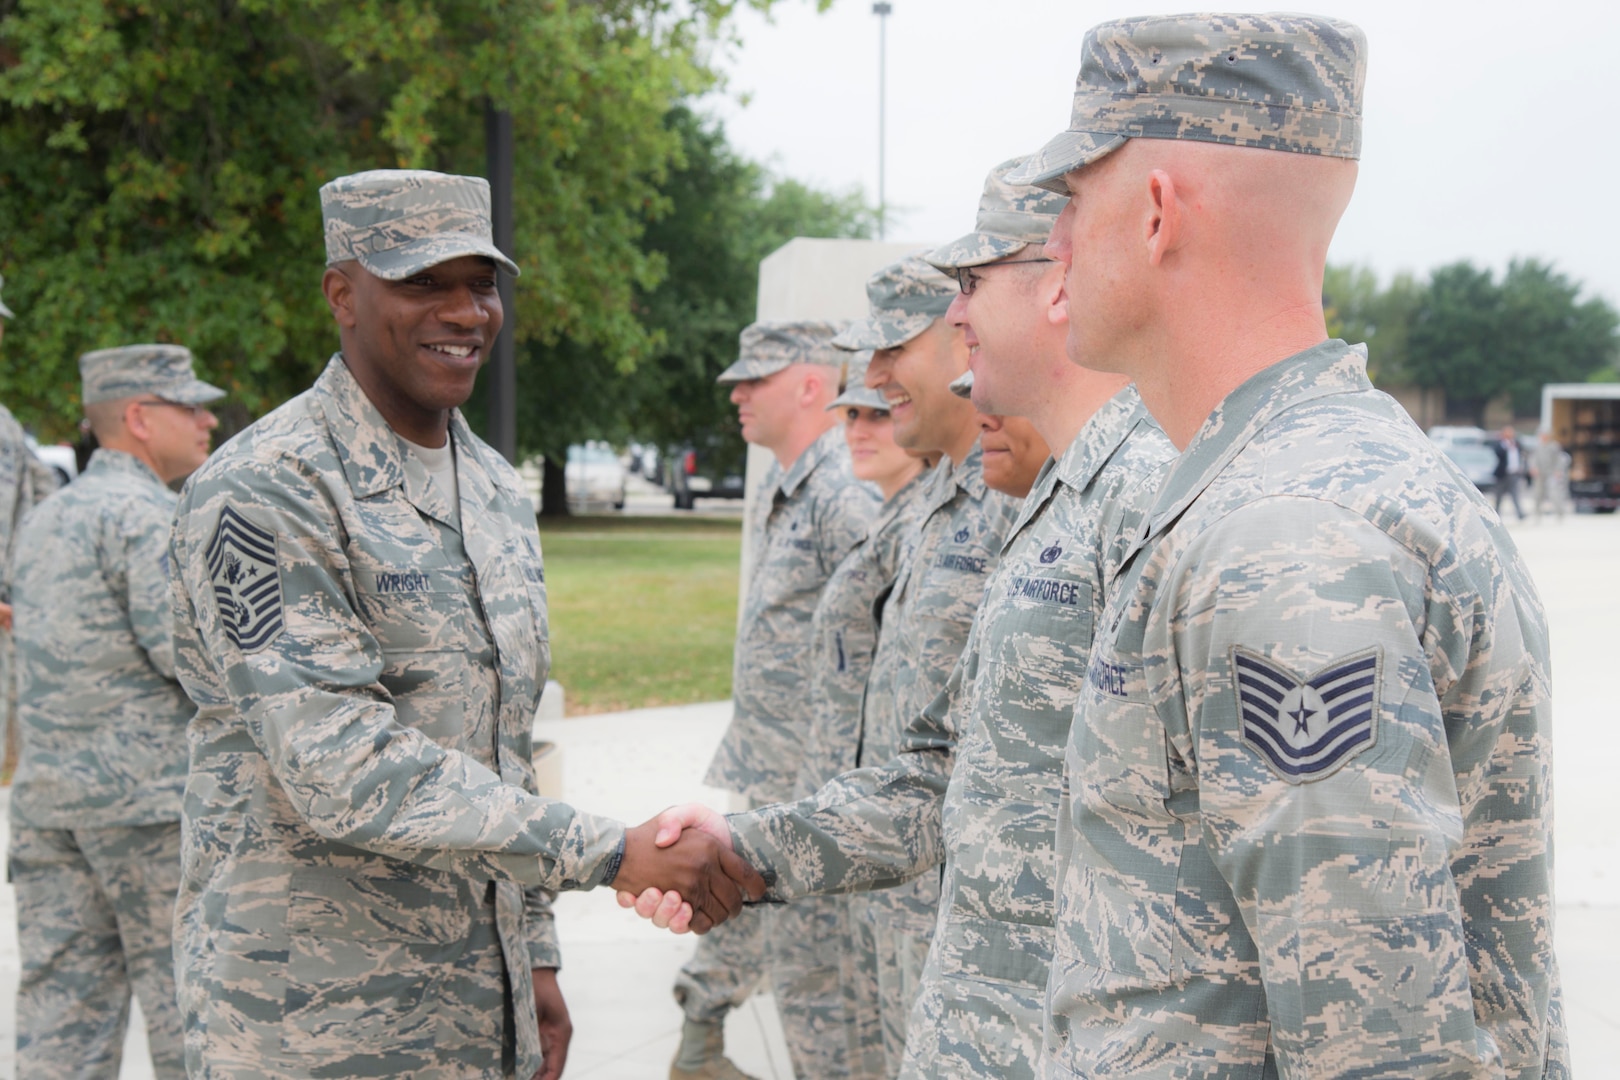 Chief Master Sgt. of the Air Force Kaleth O. Wright greets Airmen’s Week facilitators
from the 326th Training Squadron May 3, 2017, outside the Pfingston Reception
Center at Joint Base San Antonio-Lackland, Texas. Airmen’s Week facilitators are Air
Force military training instructors who lead discussion-based classes focused on
internalization of Air Force core values and developing professional, resilient
Airmen inspired by heritage and motivated to deliver Air Power for America. (U.S.
Air Force photo by Airman Dillon Parker)